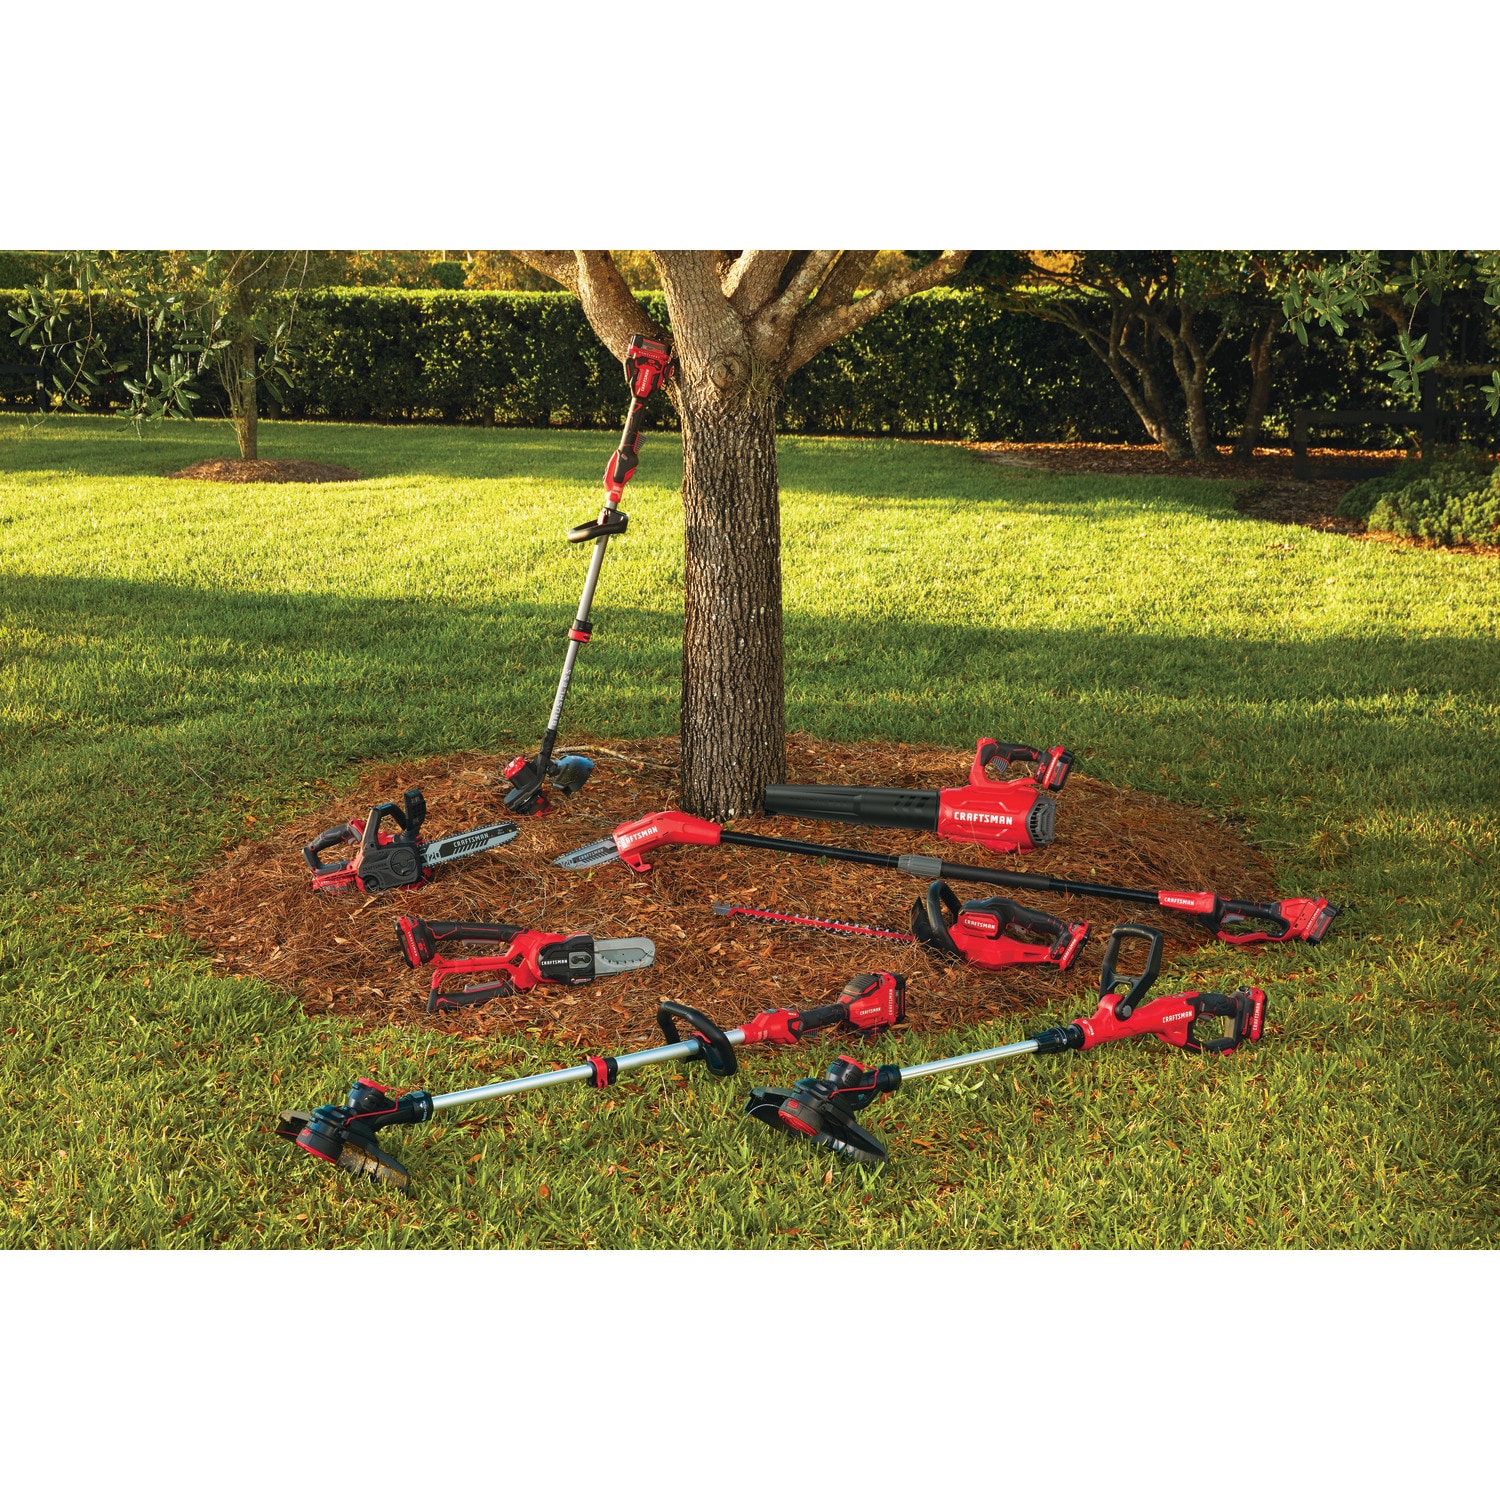 Leaf Blowers for sale in Walesboro, Indiana